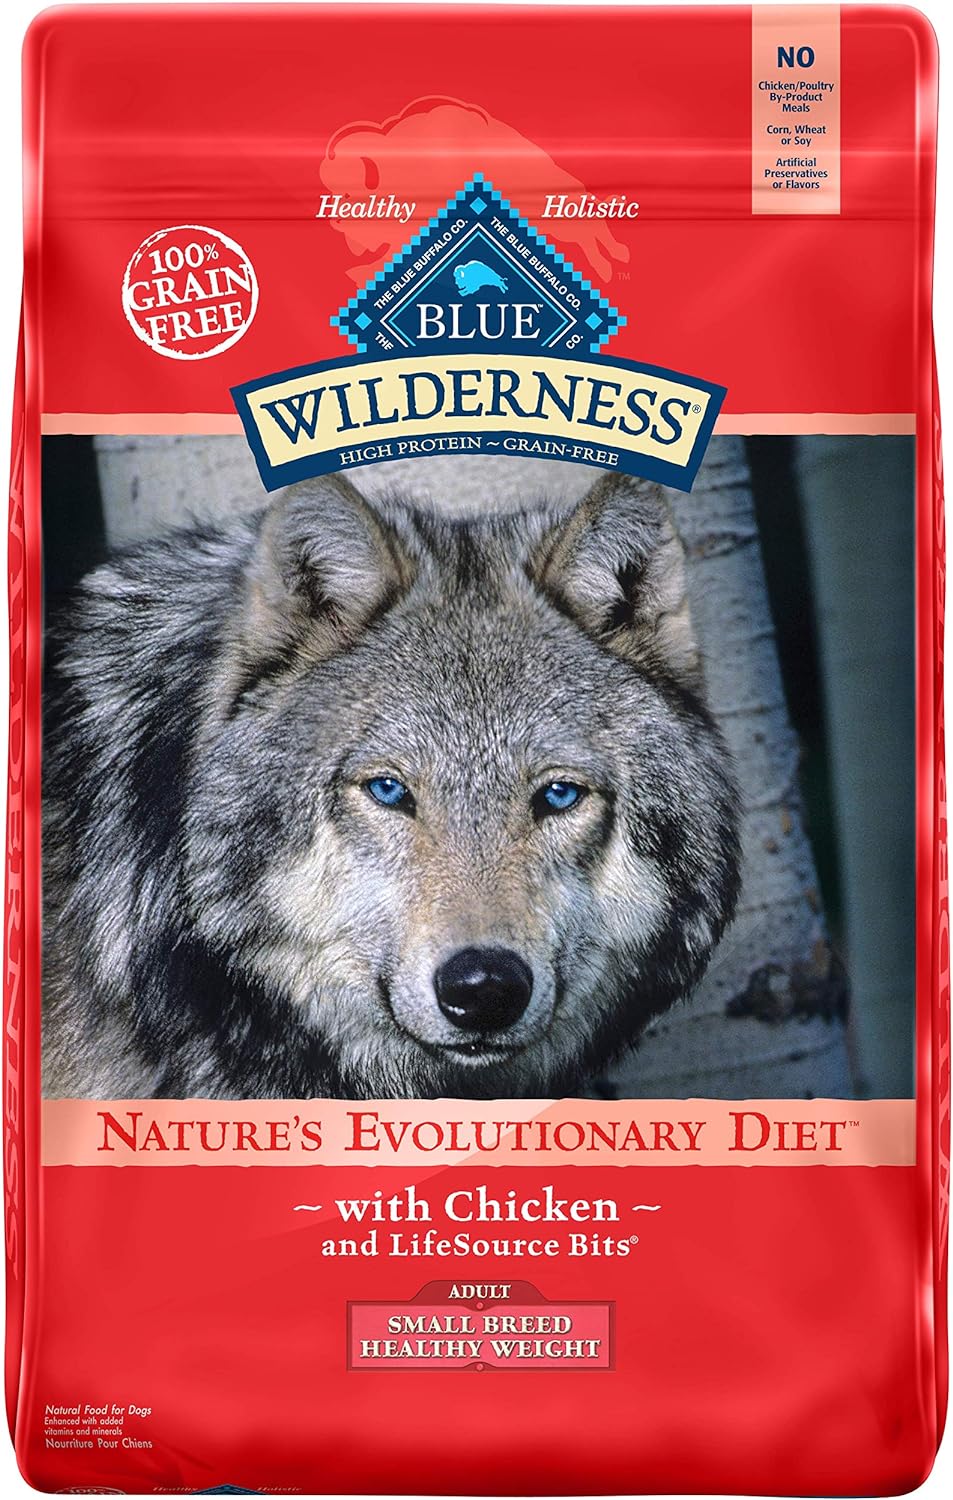 Blue Wilderness Adult Small Breed Healthy Weight Chicken Recipe Grain-Free Dry Dog Food – Gallery Image 1